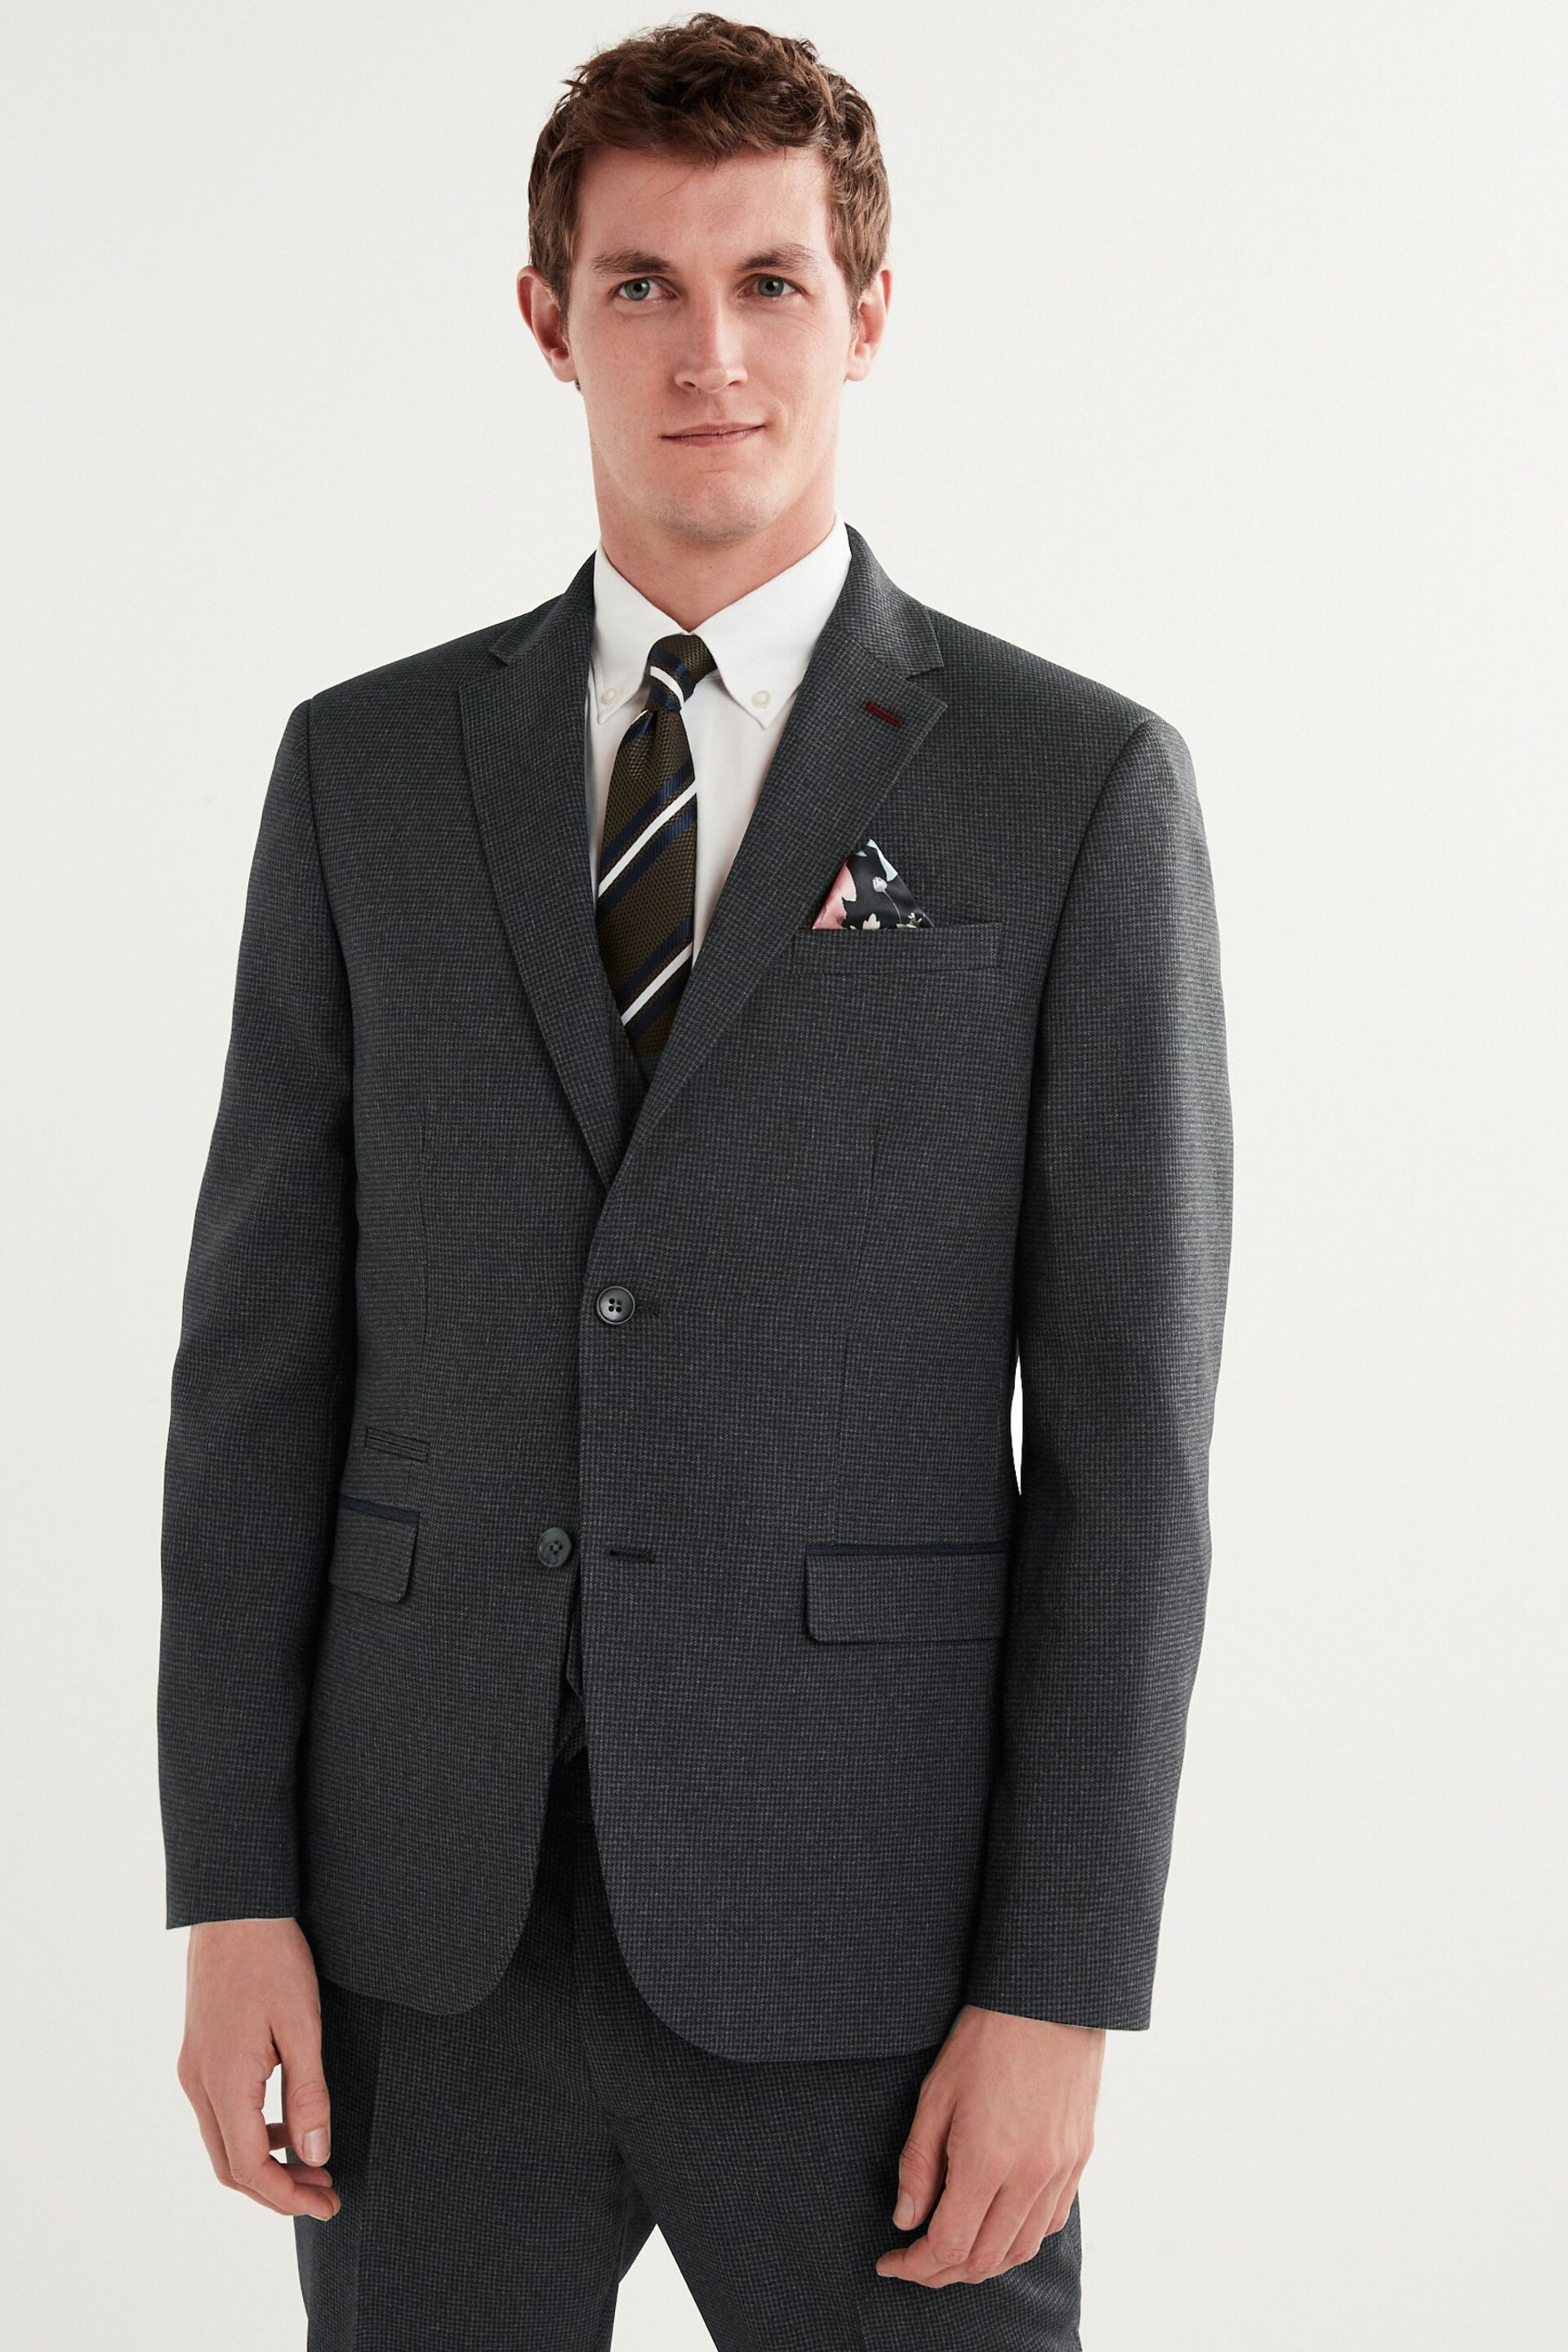 Charcoal Grey Puppytooth Suit Jacket - Image 3 of 13